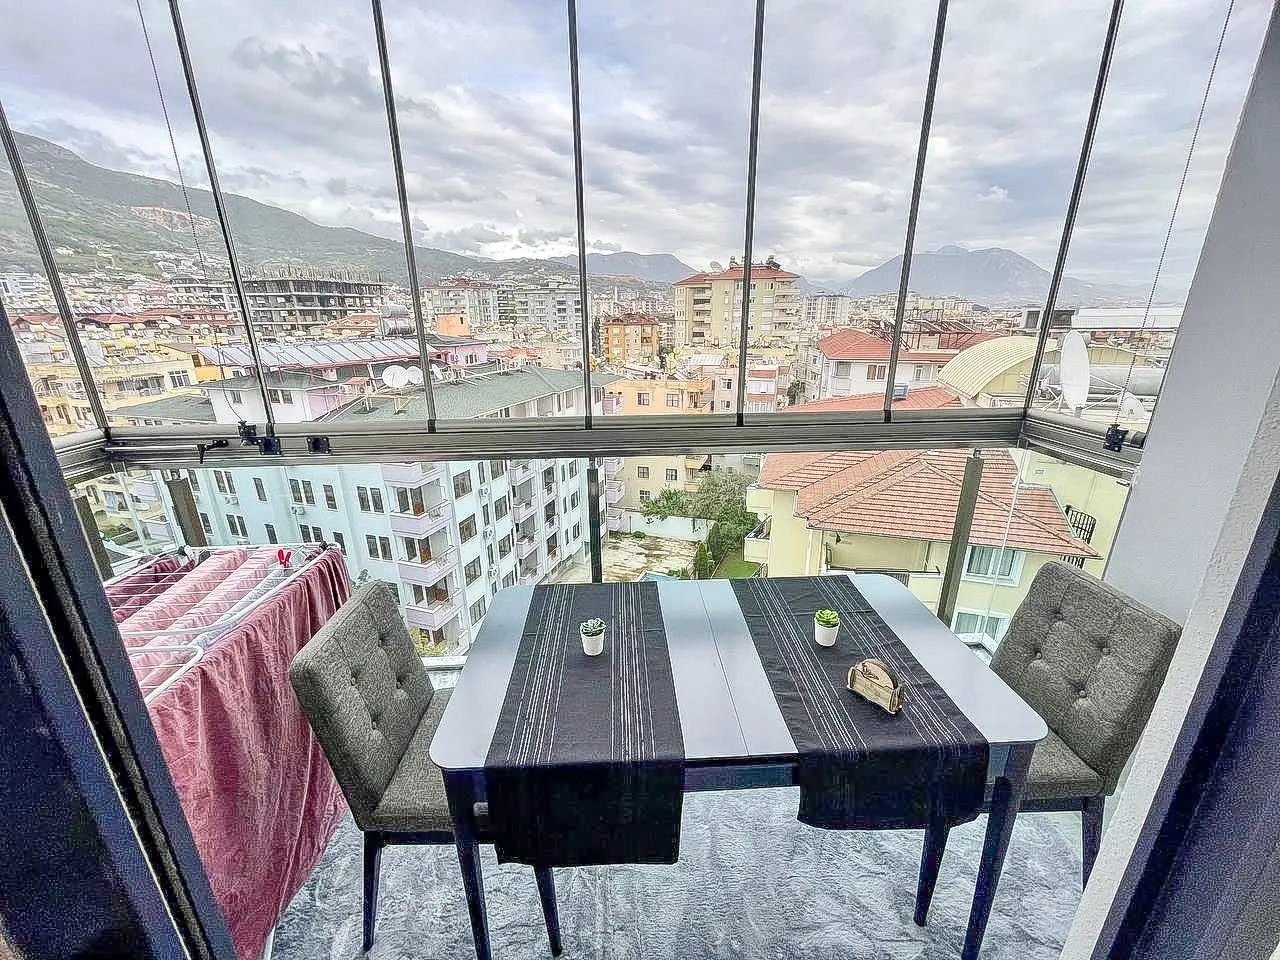 FULLY FURNISHED 2+1 FLAT IN ALANYA CENTER